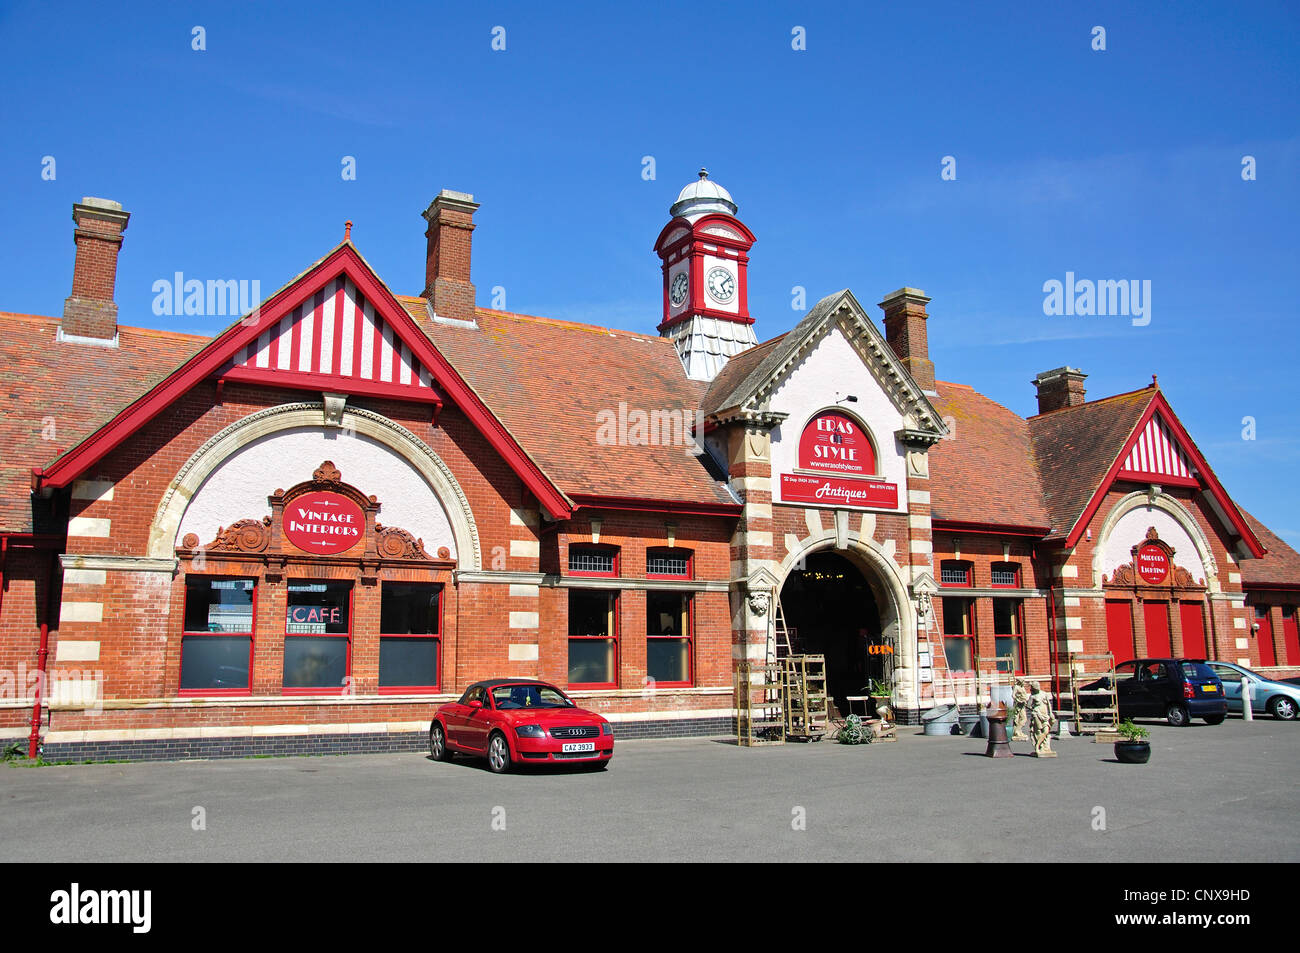 Eras of Style Antiques in former West Railway Station, Terminus Road, Bexhill-on-Sea, East Sussex, England, United Kingdom Stock Photo